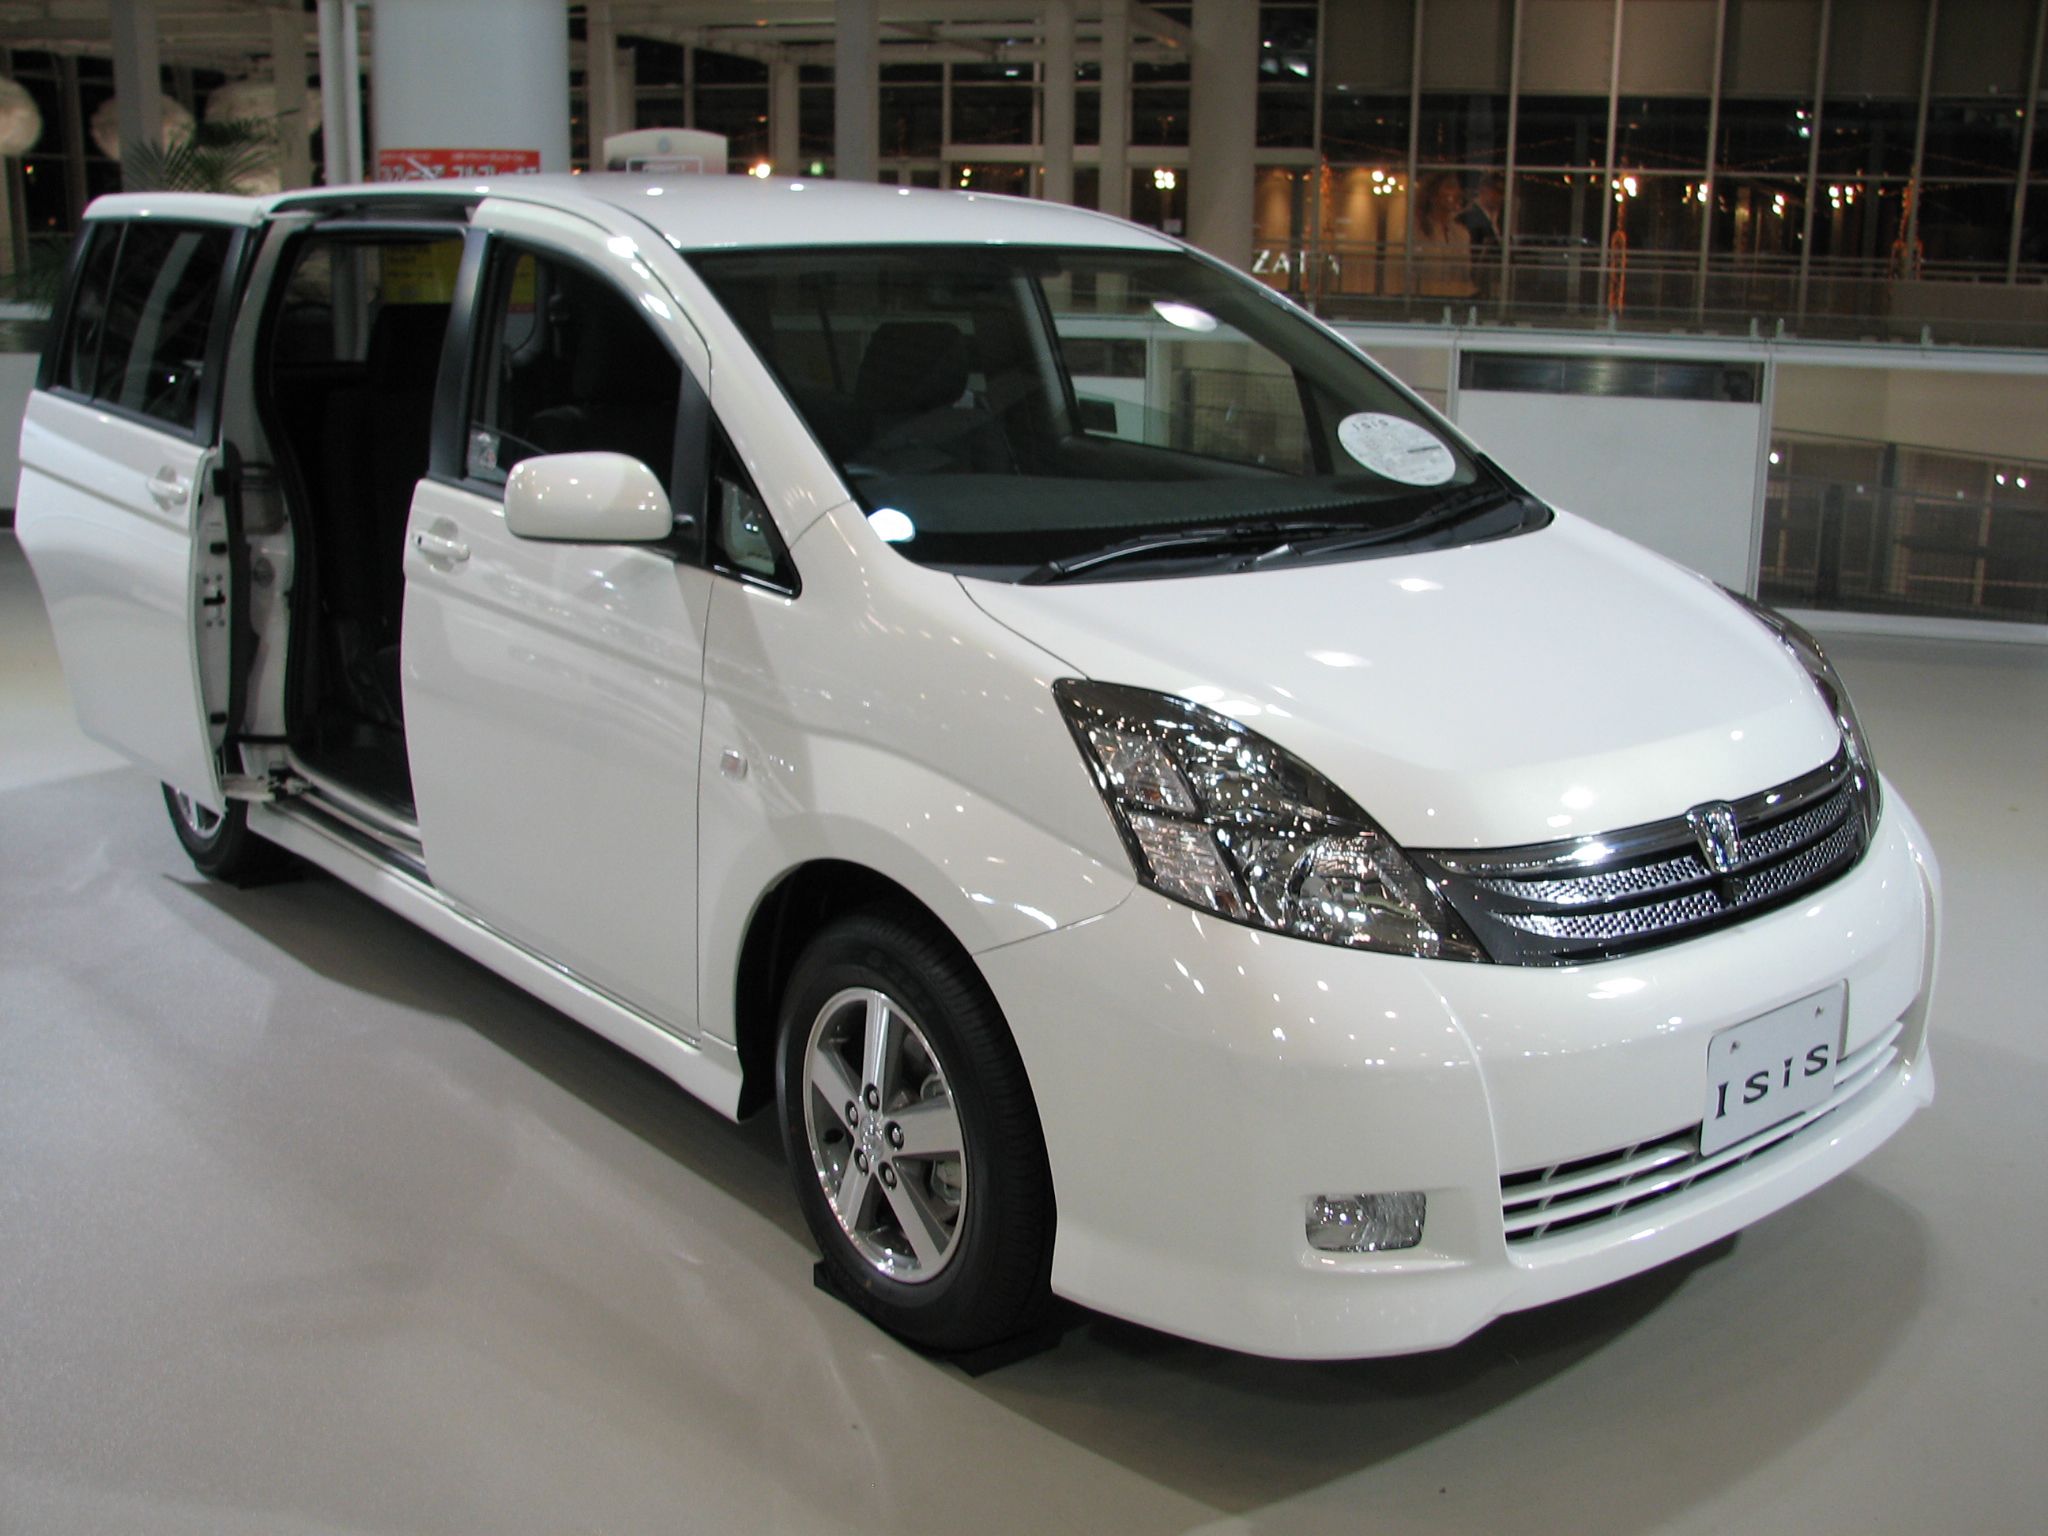 Toyota Isis 2010: Review, Amazing Pictures and Images ...